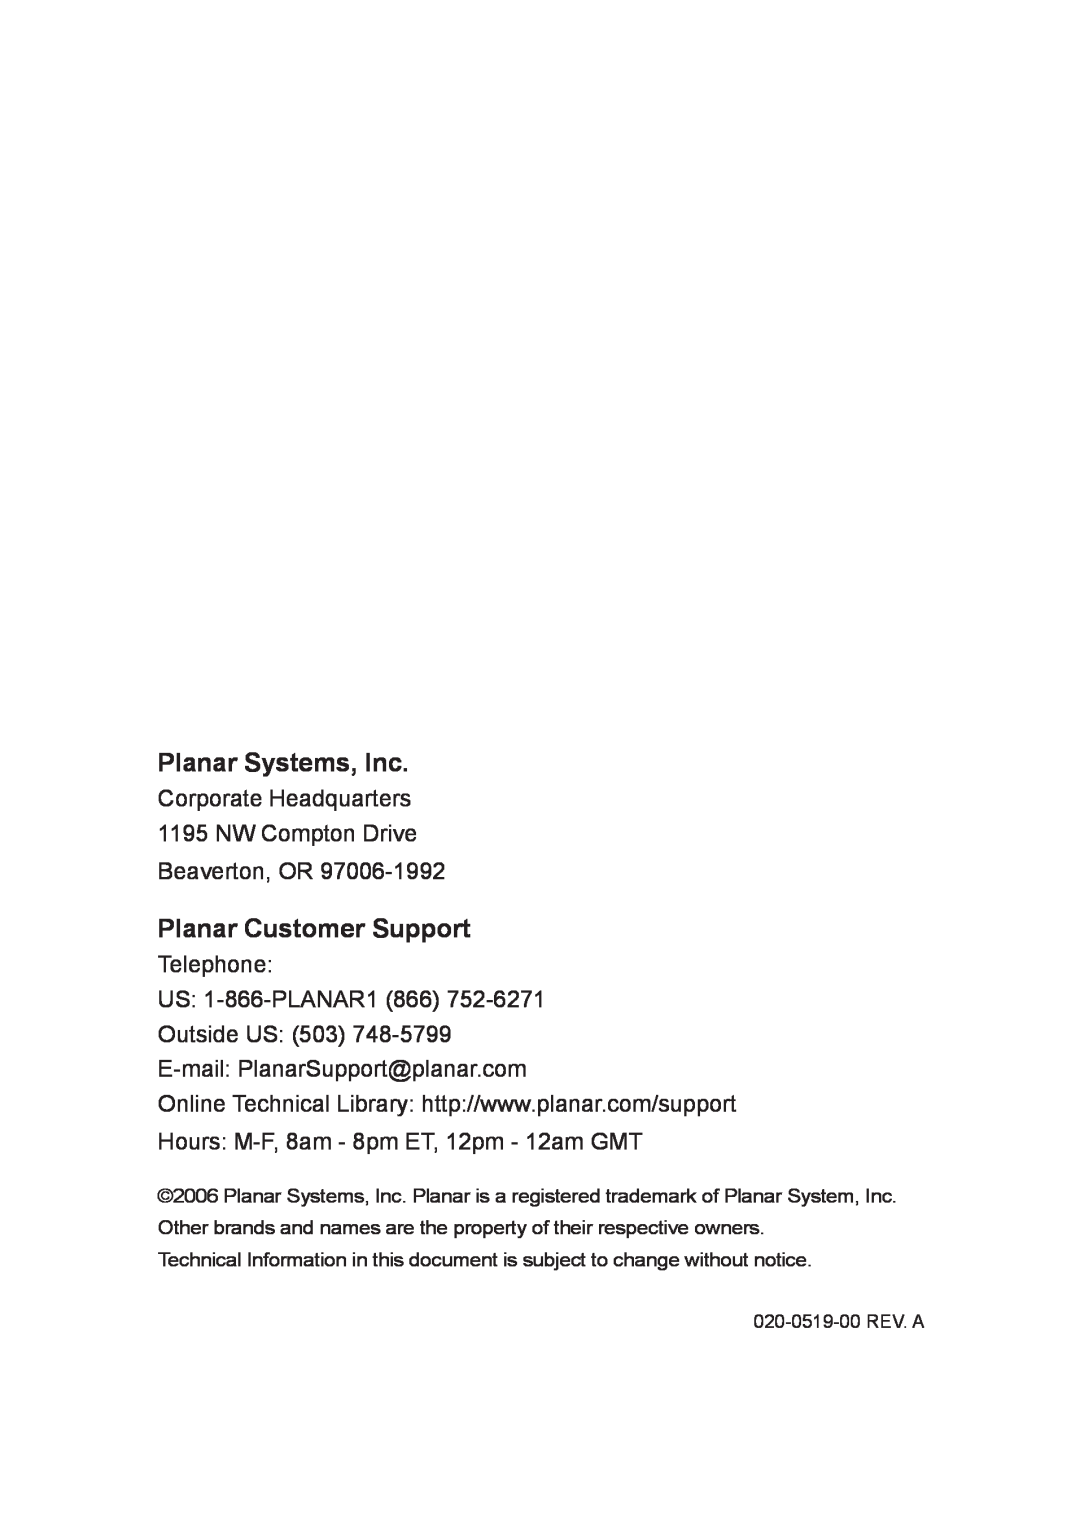 Planar PD4010 Planar Systems, Inc, Planar Customer Support, Corporate Headquarters 1195 NW Compton Drive Beaverton, OR 